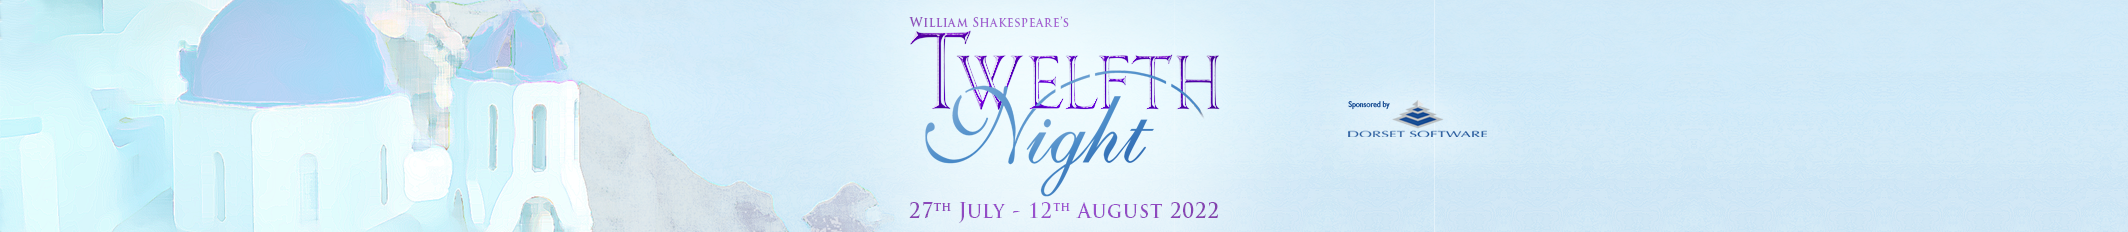 Twelfth Night. Brownsea Open Air Theatre. 27th July - 12th August 2022.